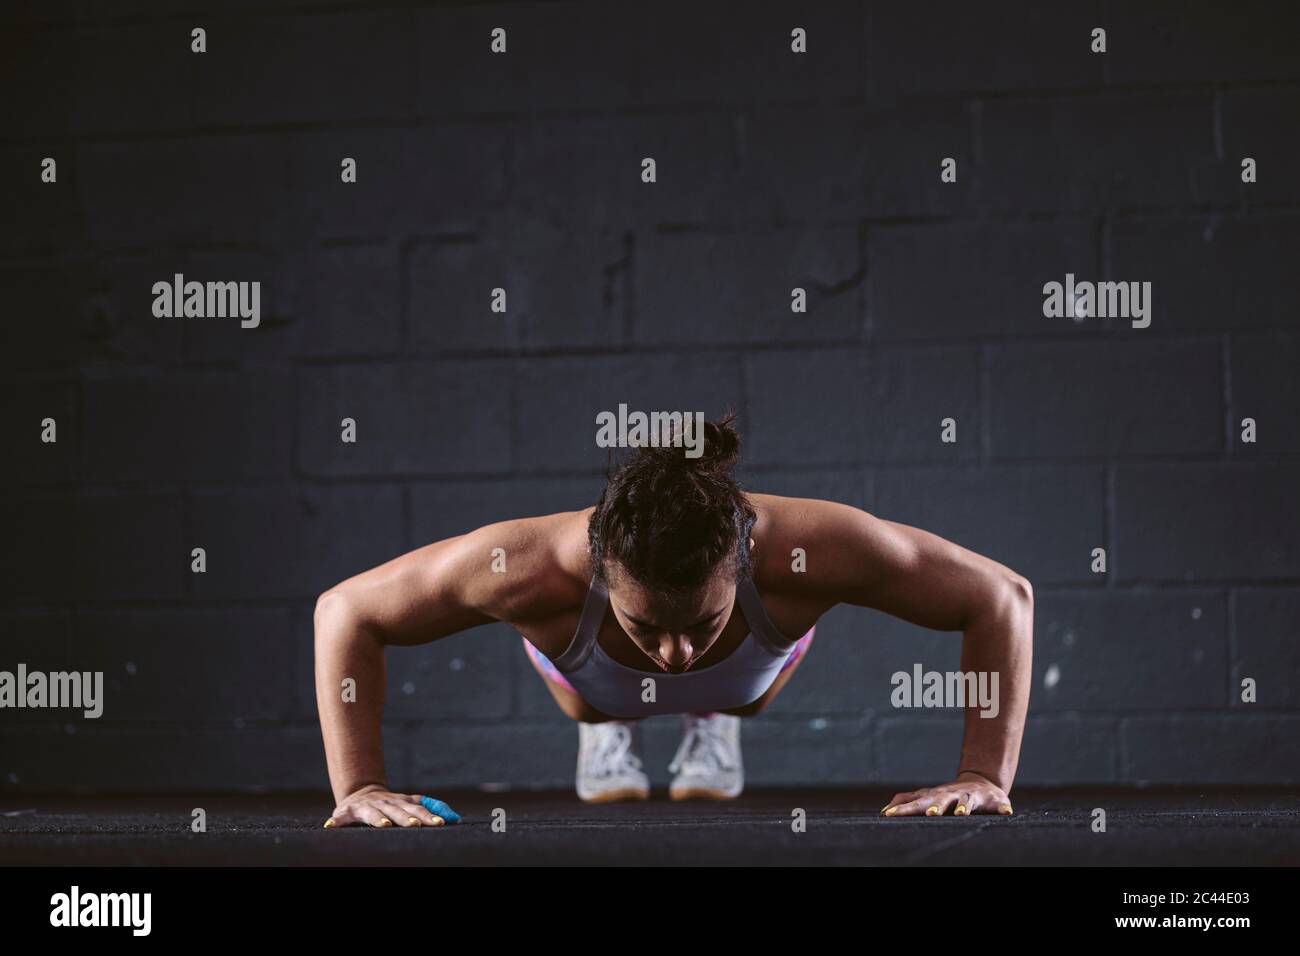 Woman practicing push-up exercise at gym Stock Photo